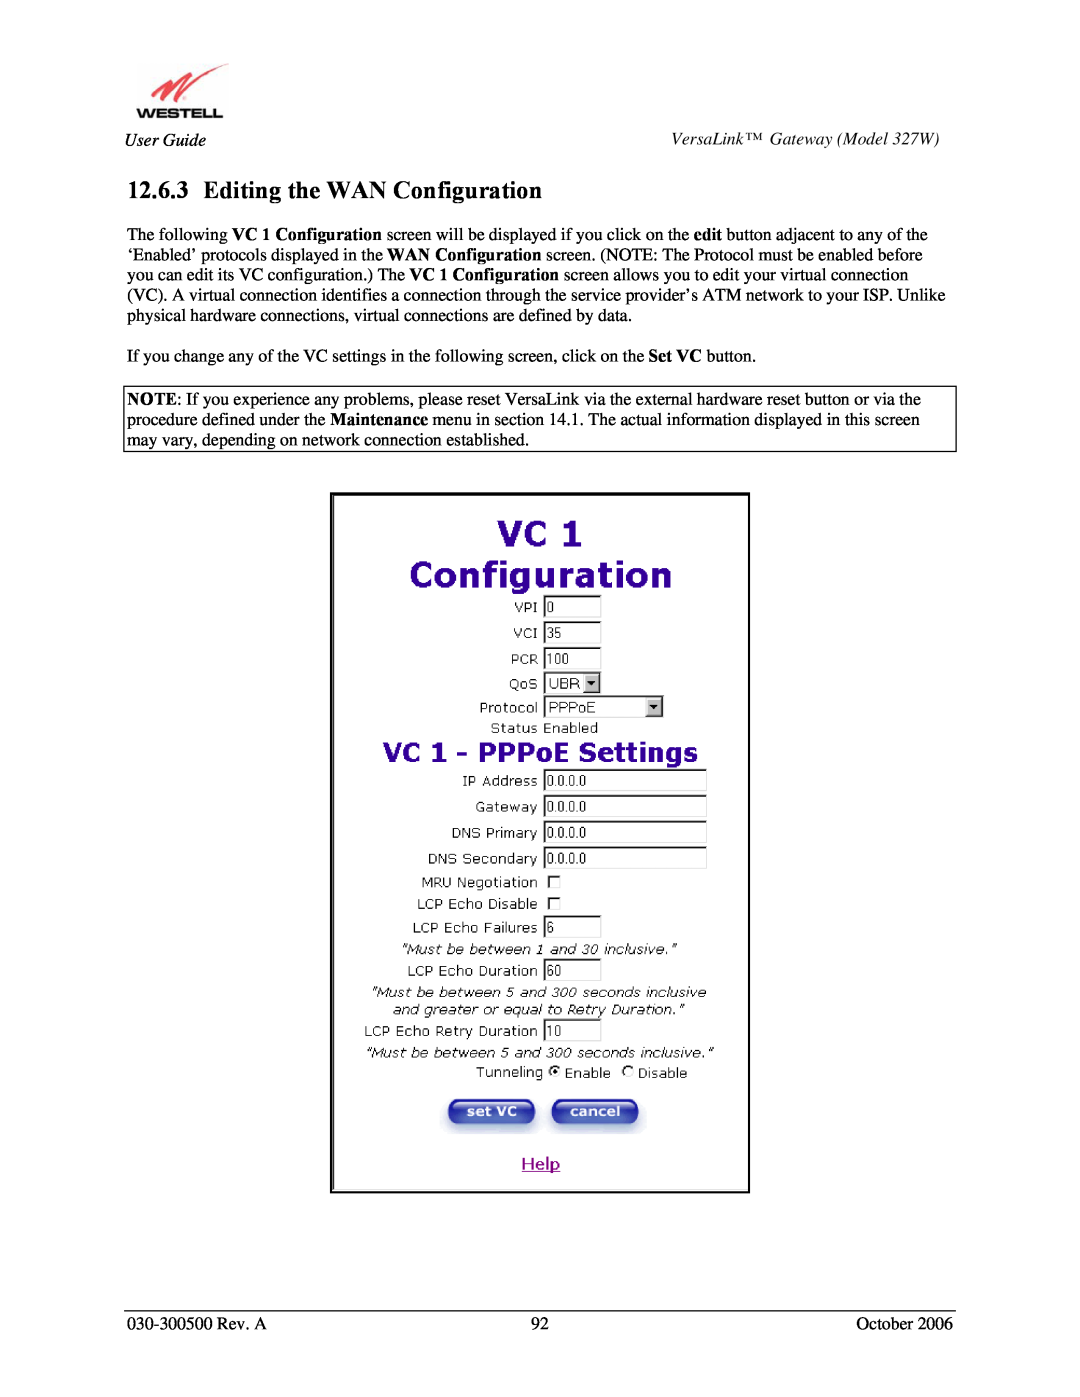 Westell Technologies 327W manual Editing the WAN Configuration 